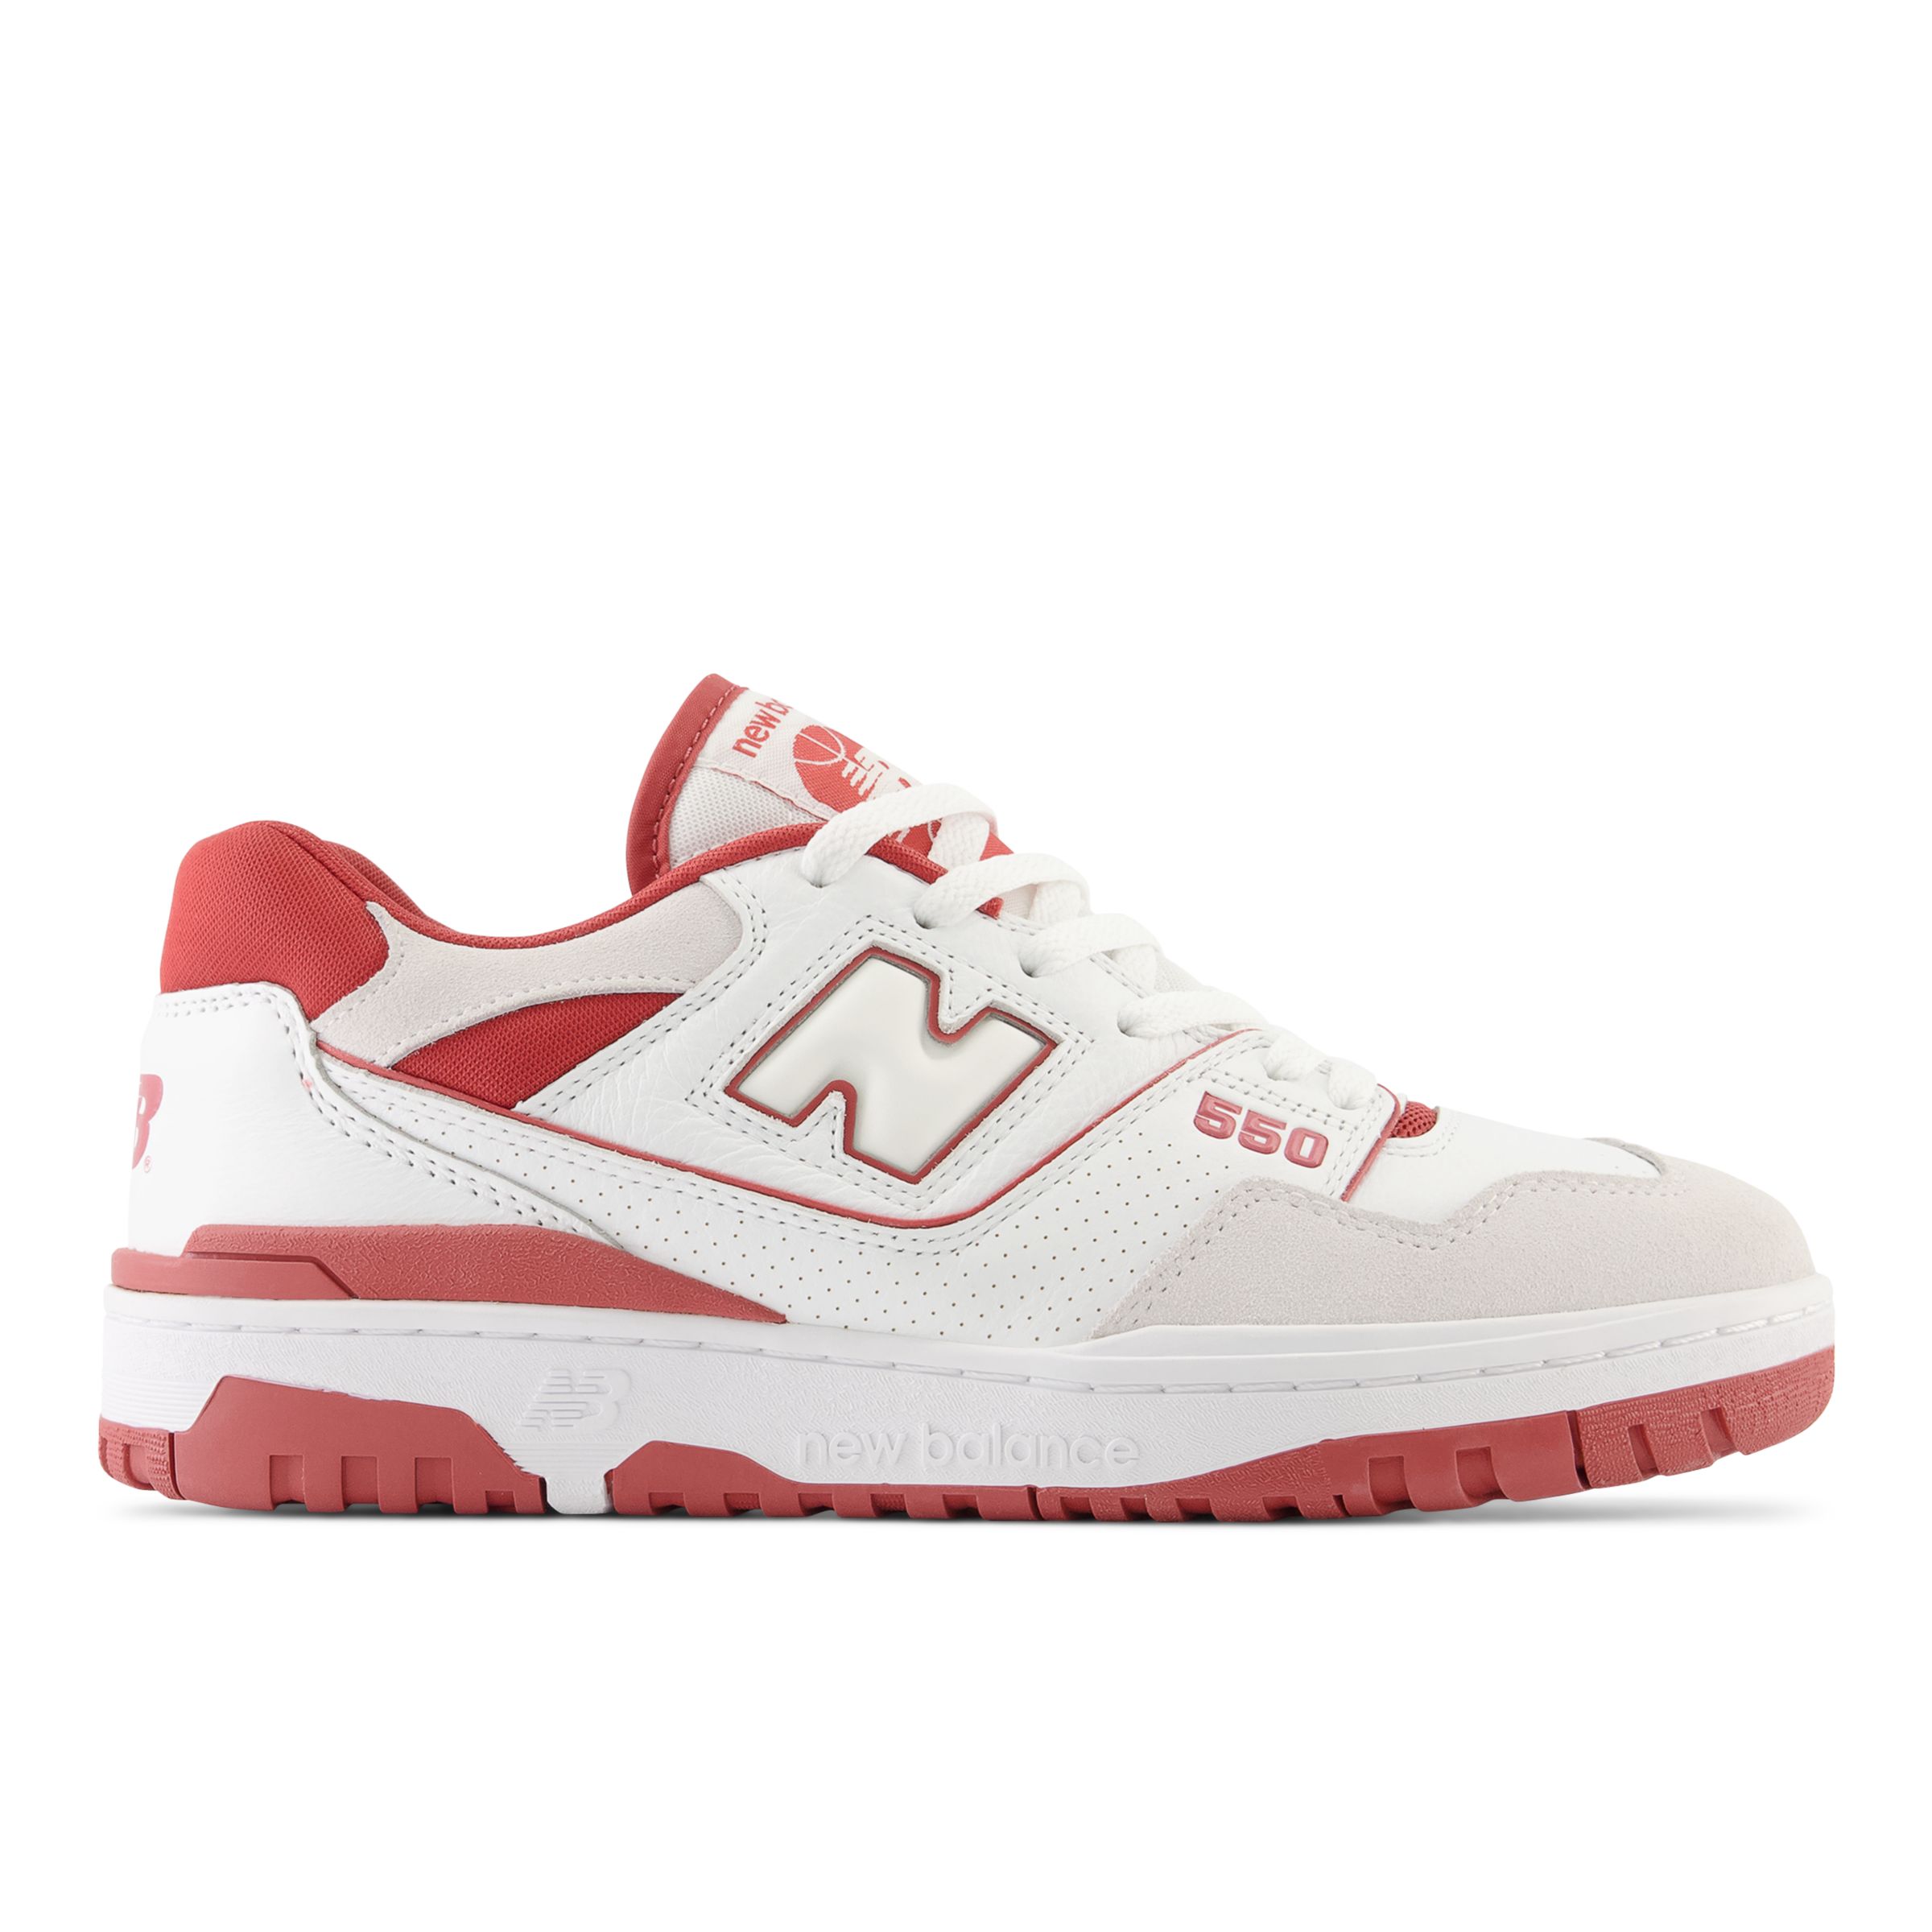 New Balance Shoes, Clothing, & Accessories